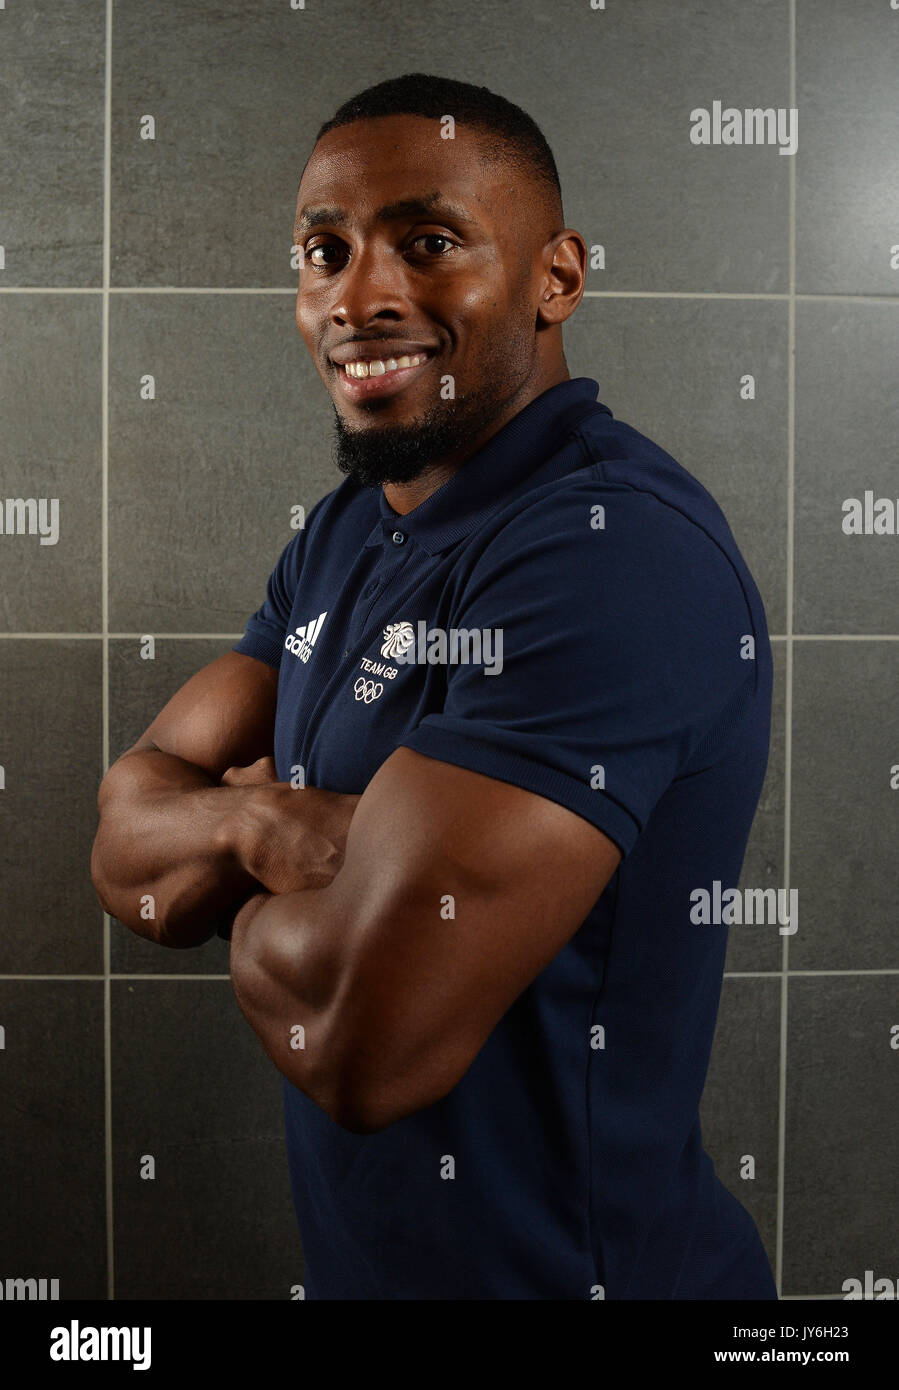 Joel Fearon during the PyeongChang 2018 Olympic Winter Games photocall at Heriot Watt University, Oriam. PRESS ASSOCIATION Photo. Picture date: Friday August 18, 2017. Photo credit should read: Mark Runnacles/PA Wire Stock Photo